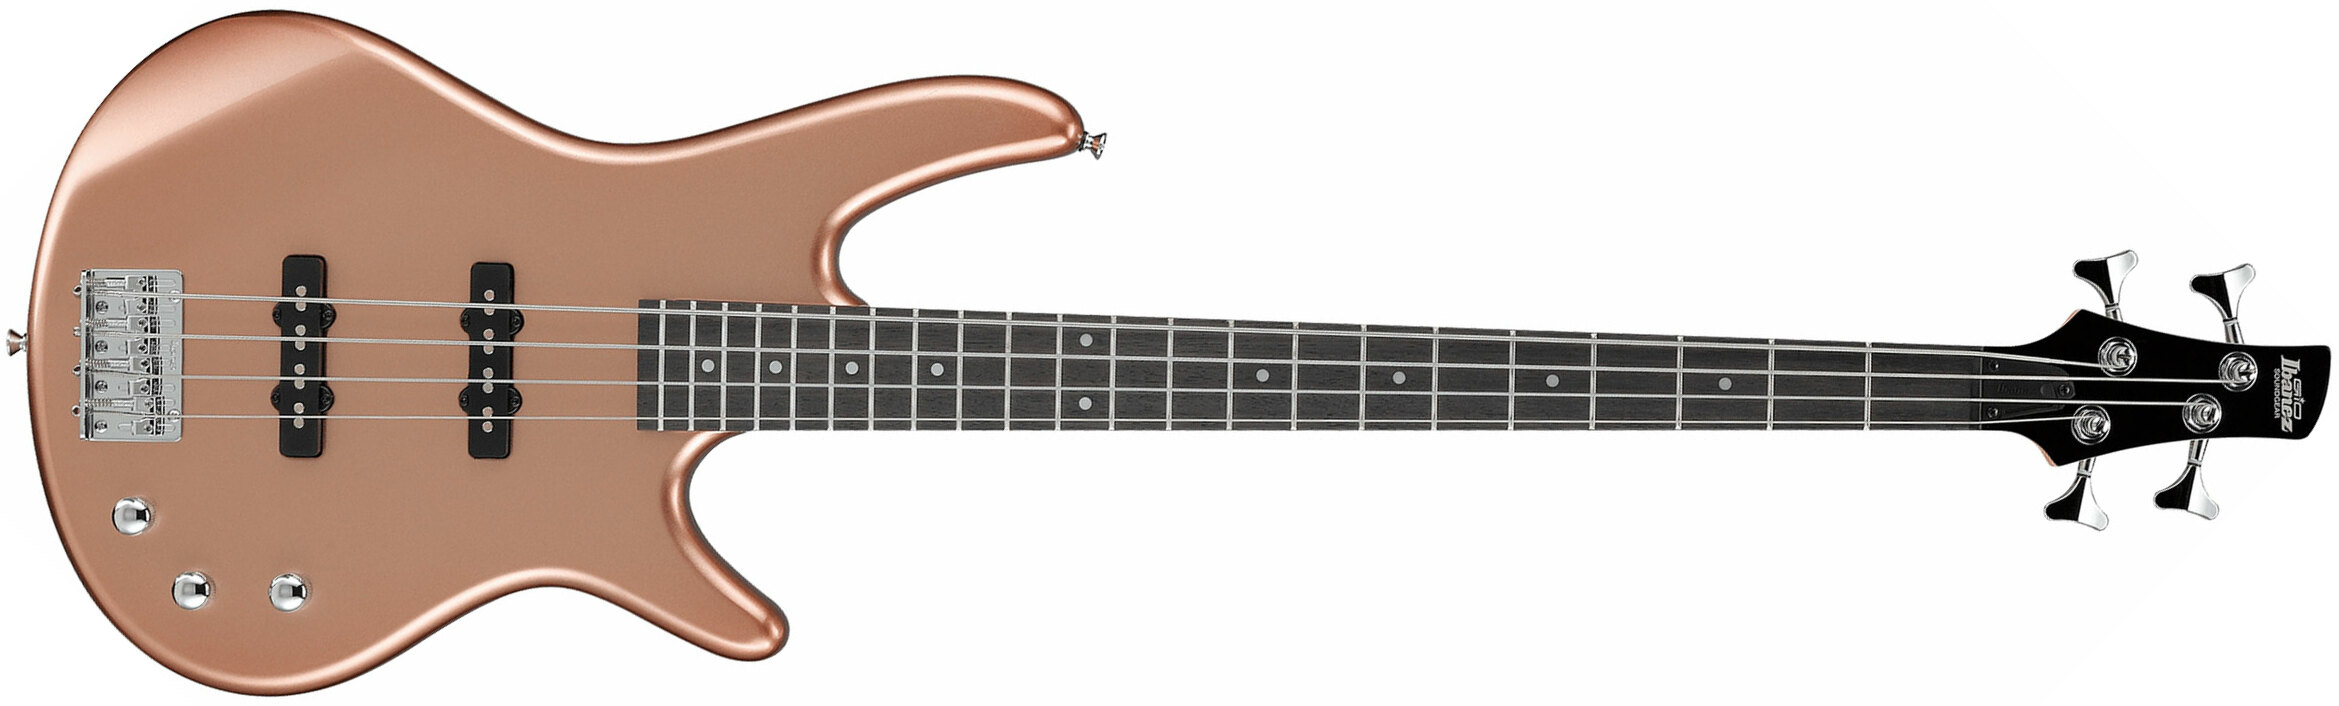 Ibanez Gsr180 Cm Gio Pur - Copper Metallic - Solid body electric bass - Main picture